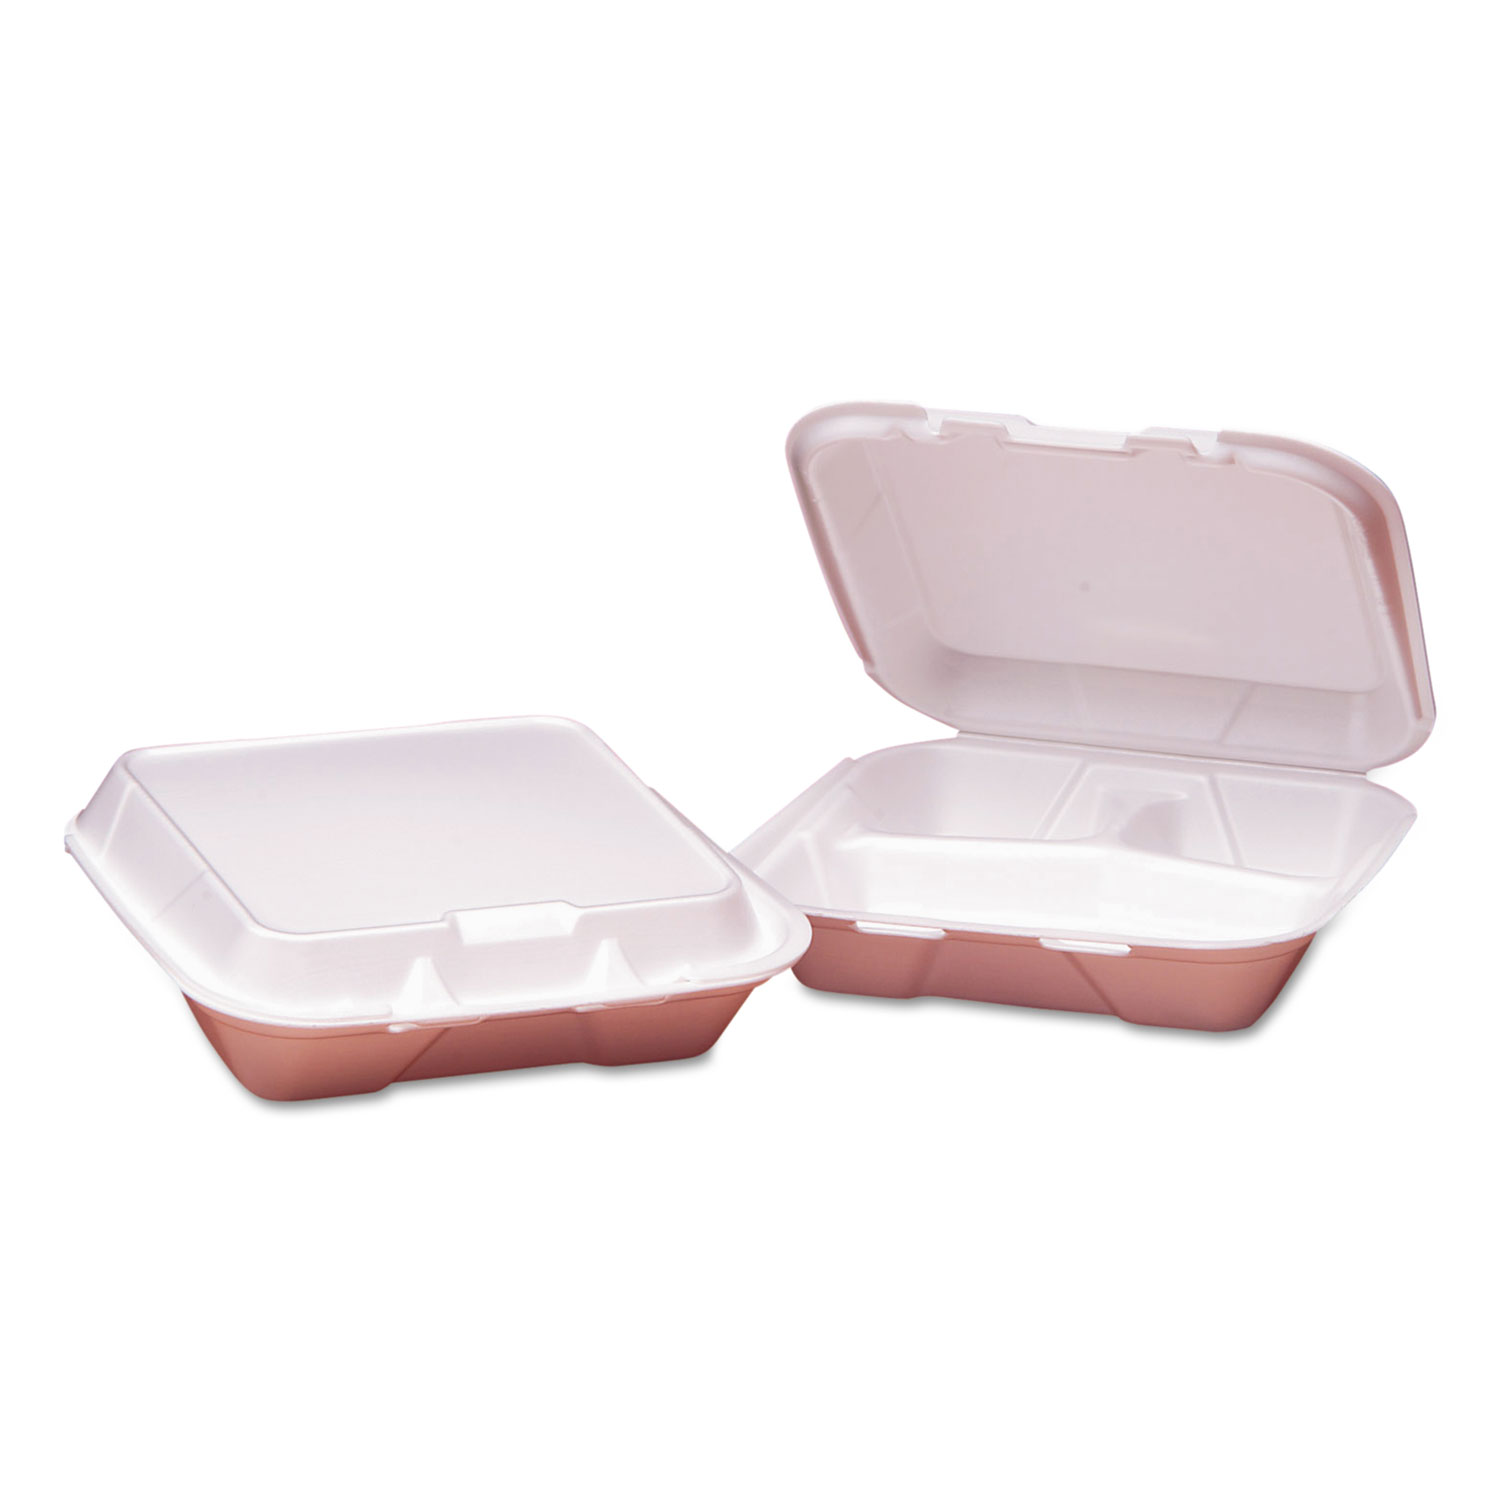  GEN SN223VW-H-0183400 Foam Hinged Carryout Containers, 3-Compartment, Small, White, 100/PK, 2 PK/CT (GENHINGEDS3) 